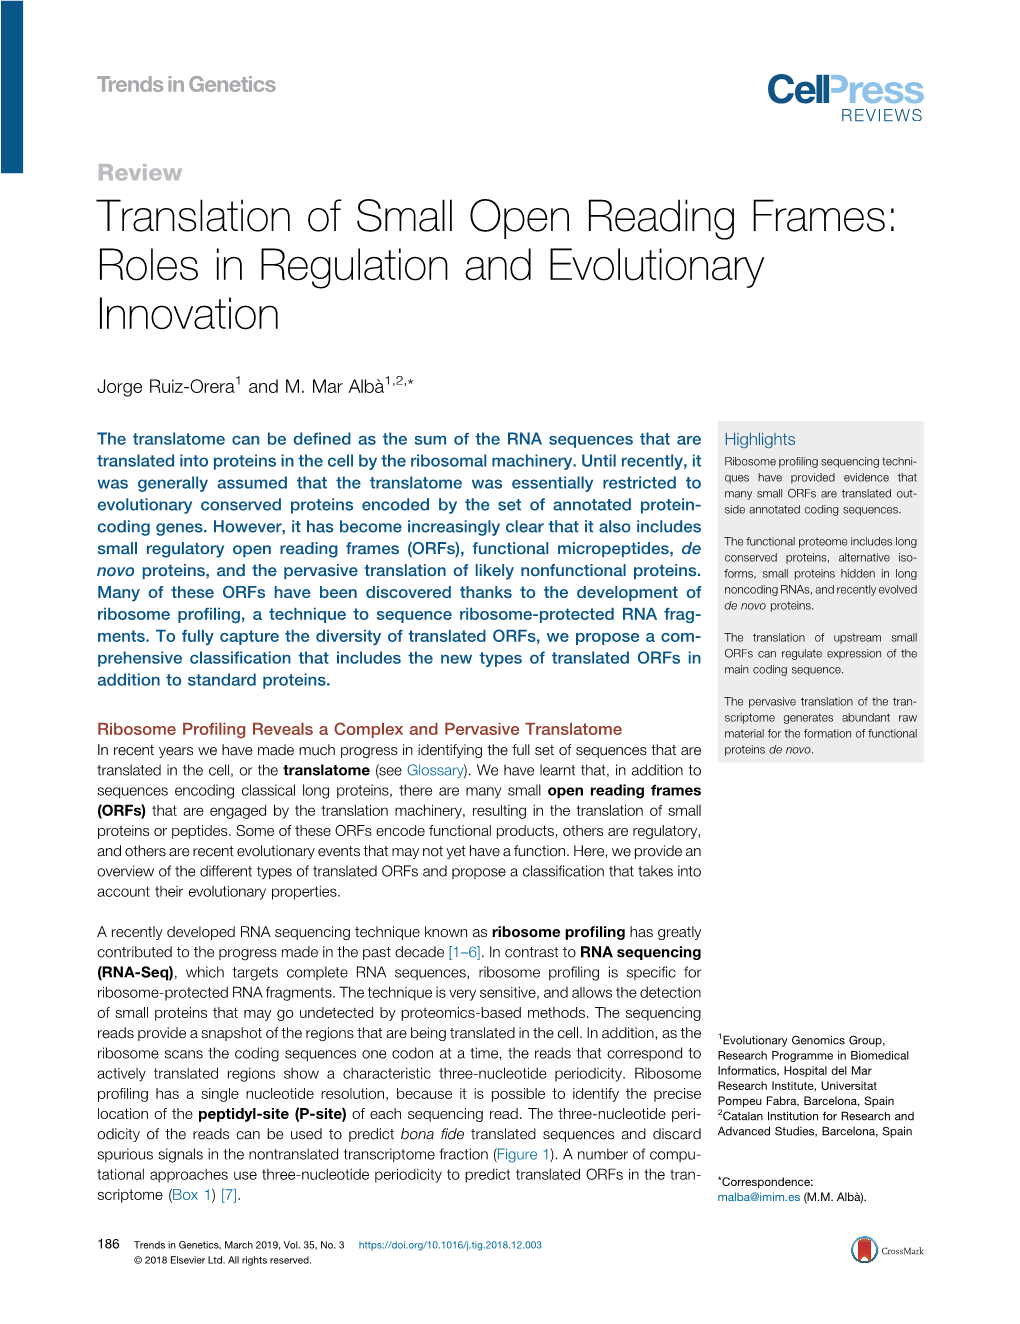 Translation of Small Open Reading Frames: Roles in Regulation